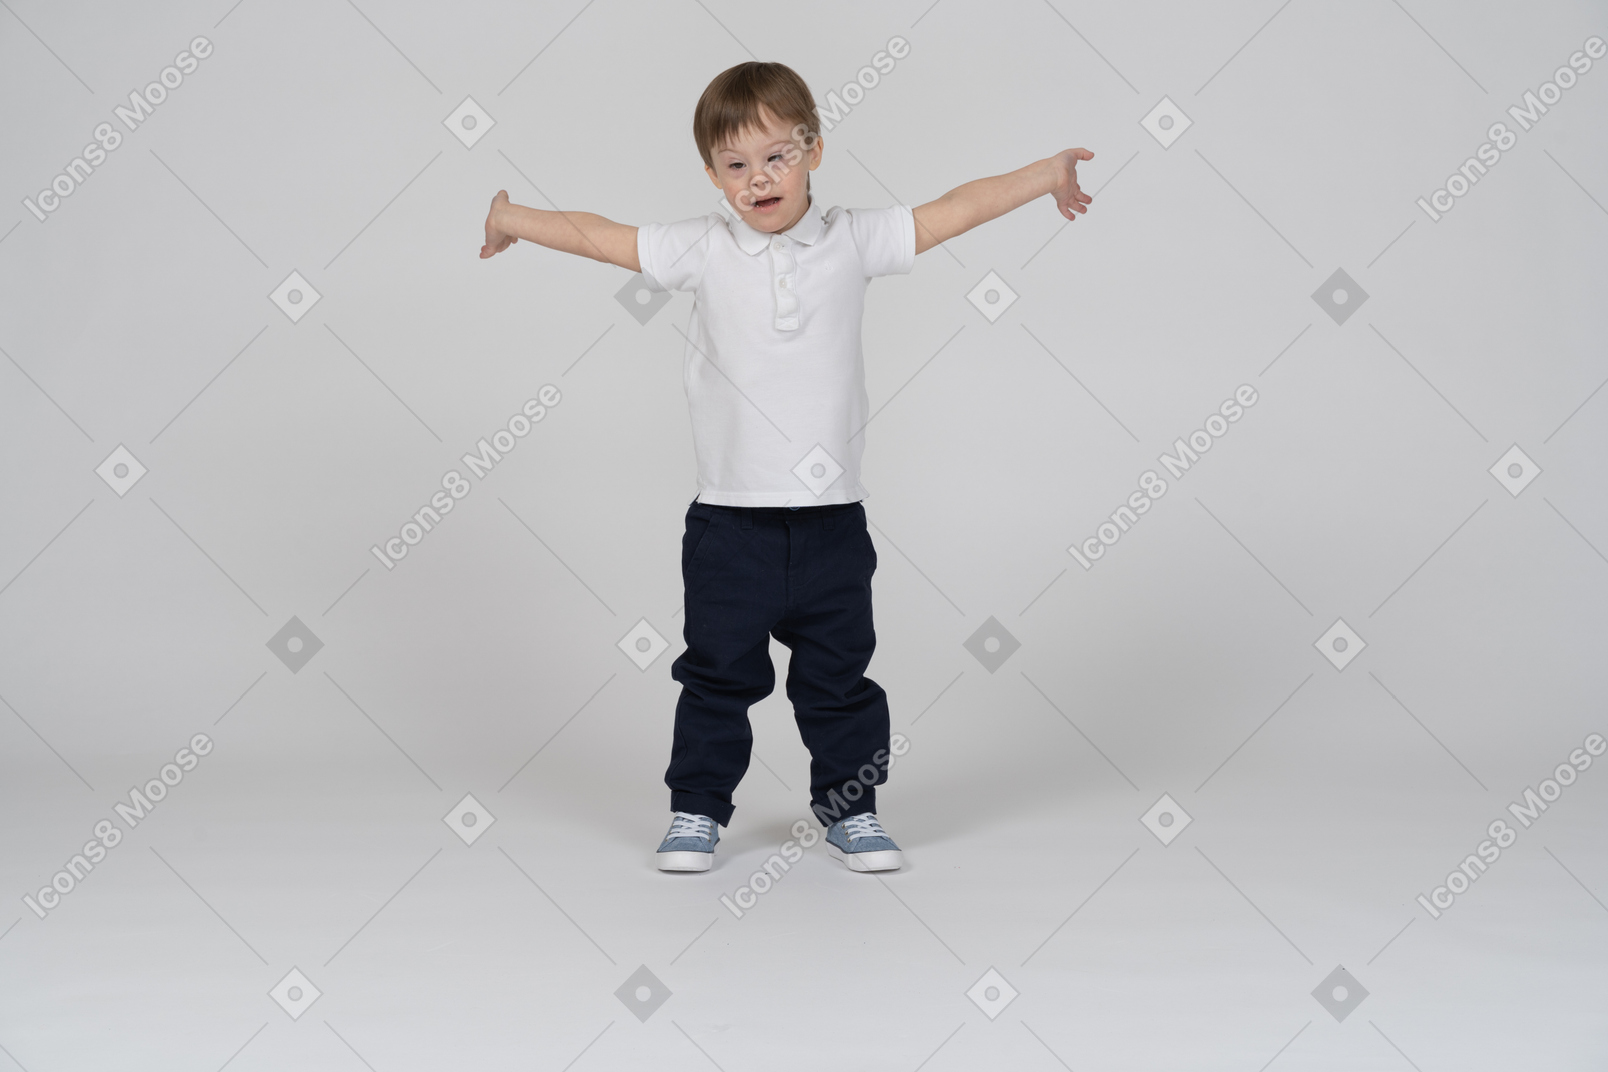 Little boy standing with his arms extended